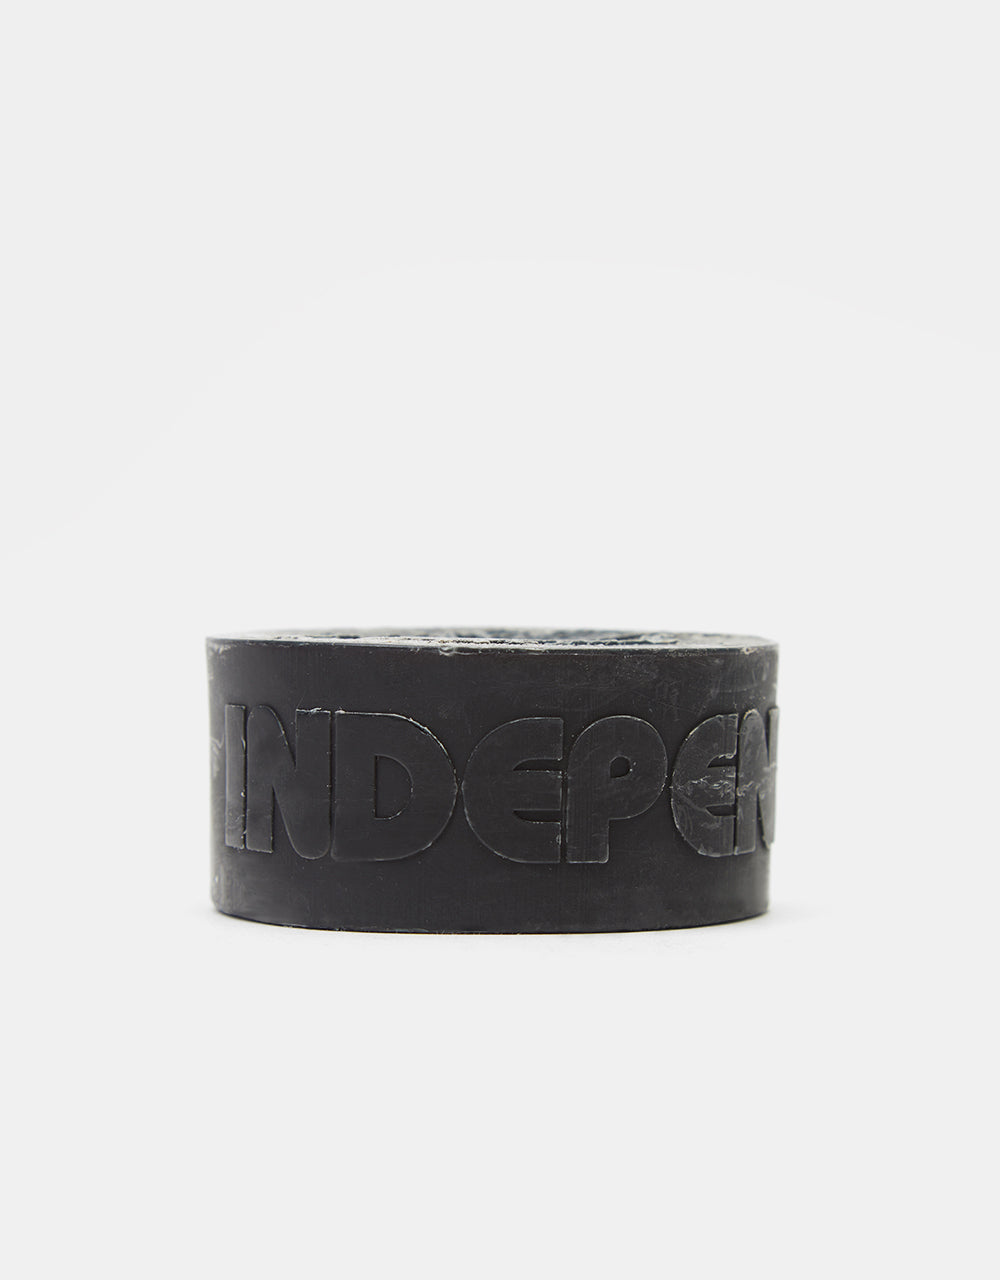 Hockey x Independent Puck the Rest Wax